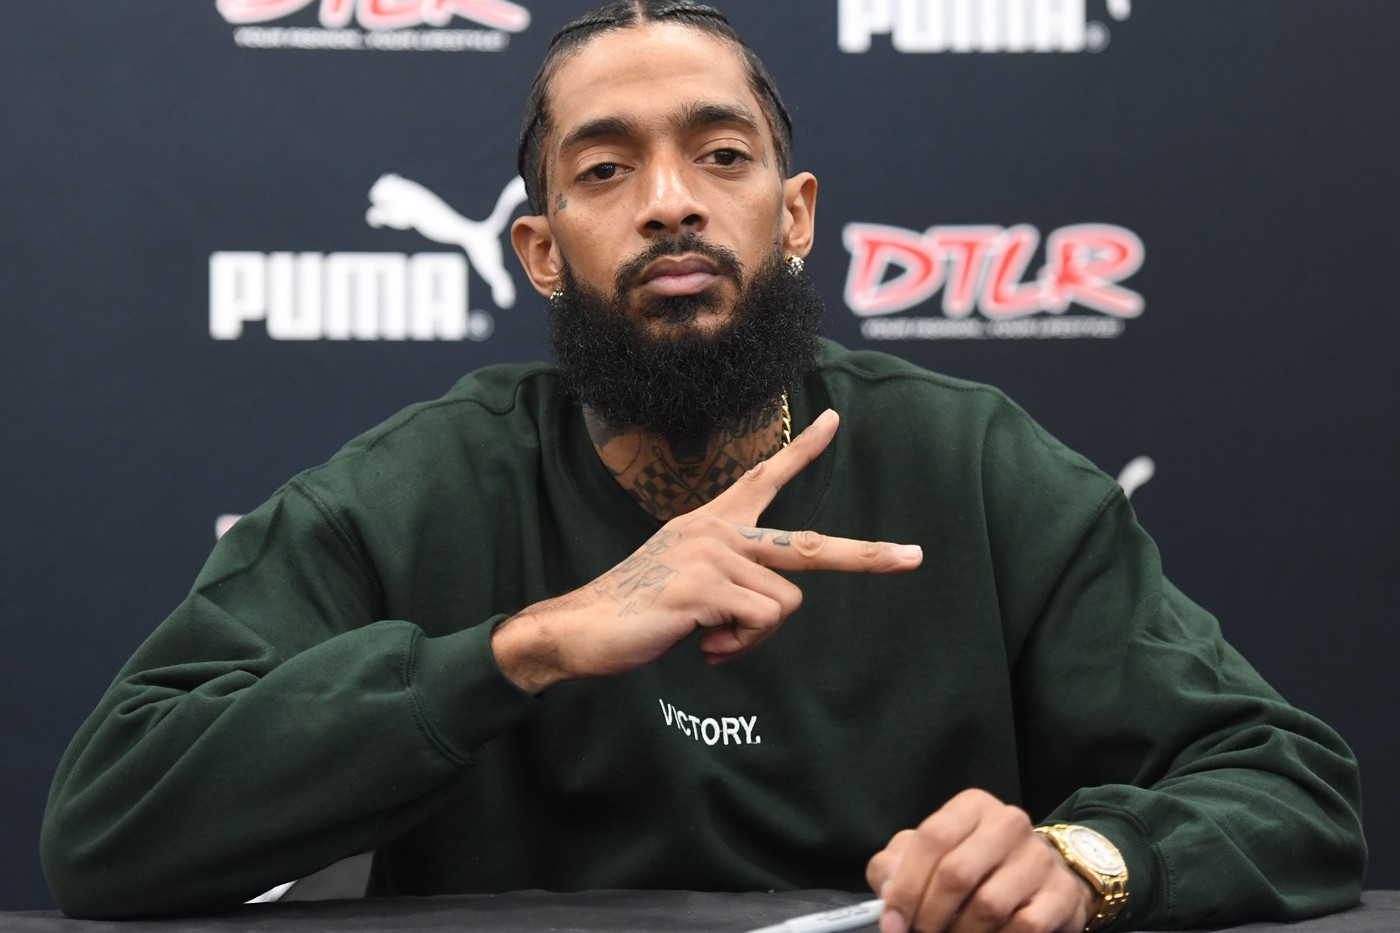 Nipsey Hussle Was Not Target of Gang Investigation, LAPD Says